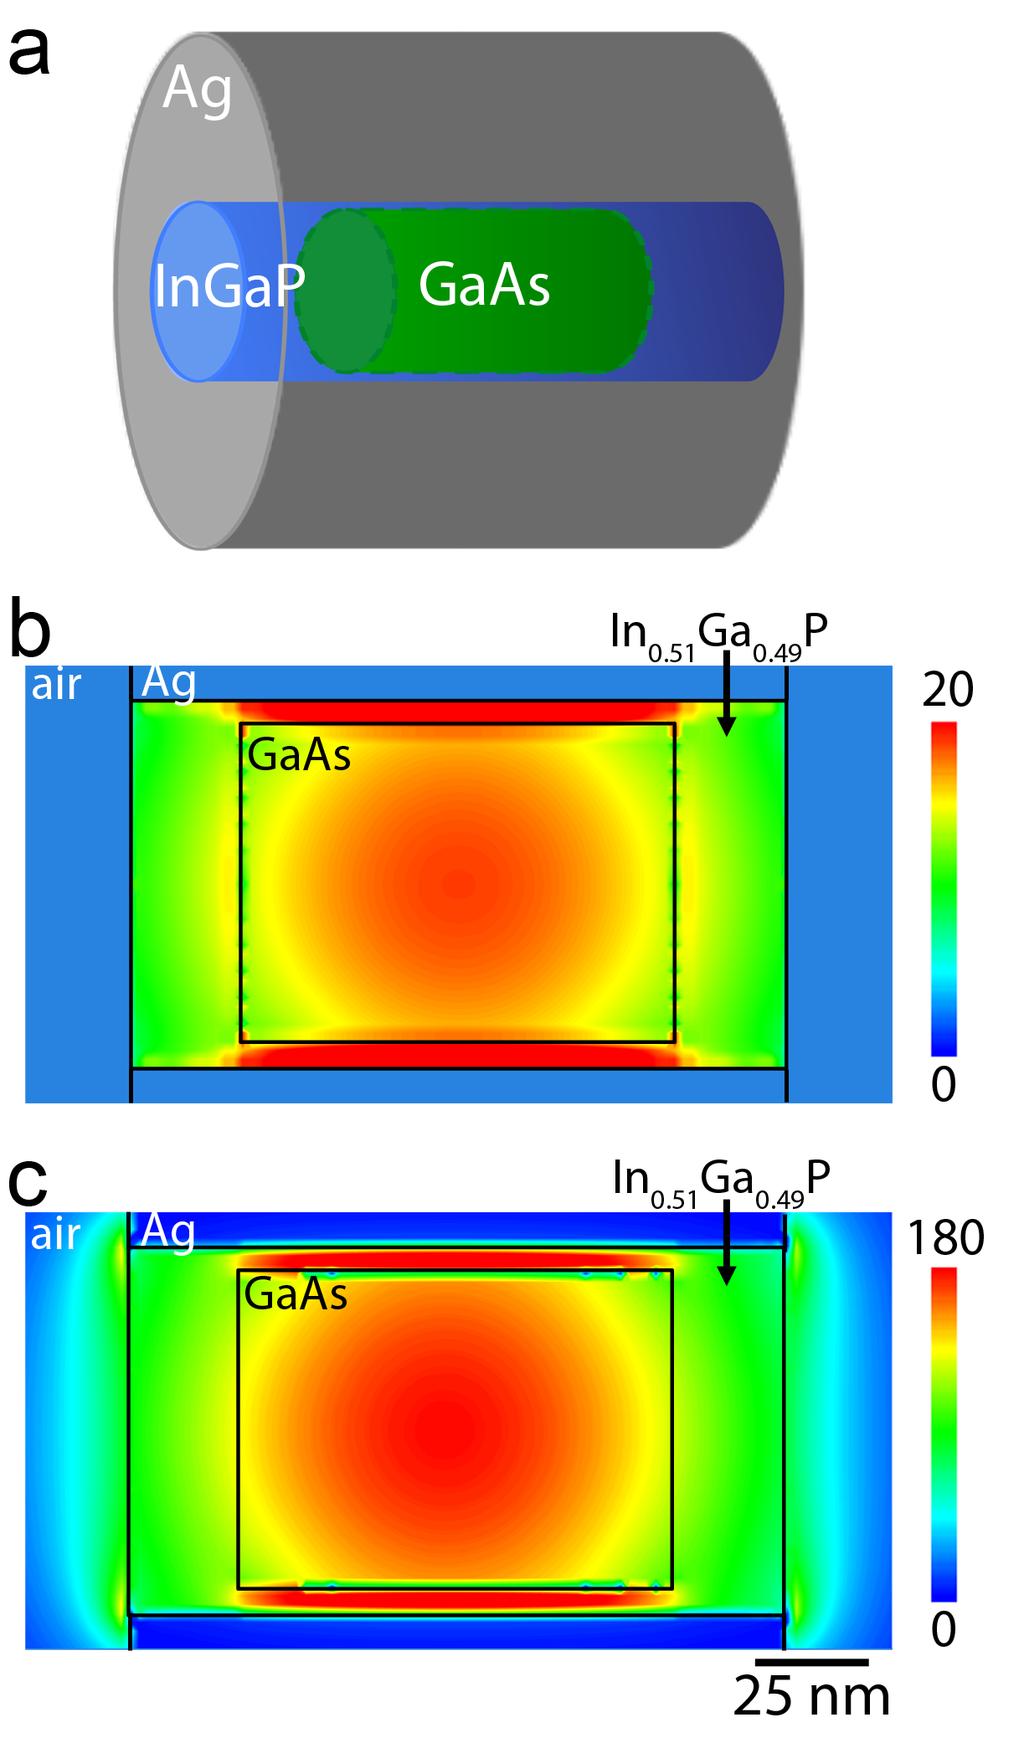 Figure 6.3. (a) Schematic of a GaAs-InGaP-Ag core-shell nanowire resonator with GaAs active layer (a = 36 nm, LA = 100 nm), In0.51 Ga0.